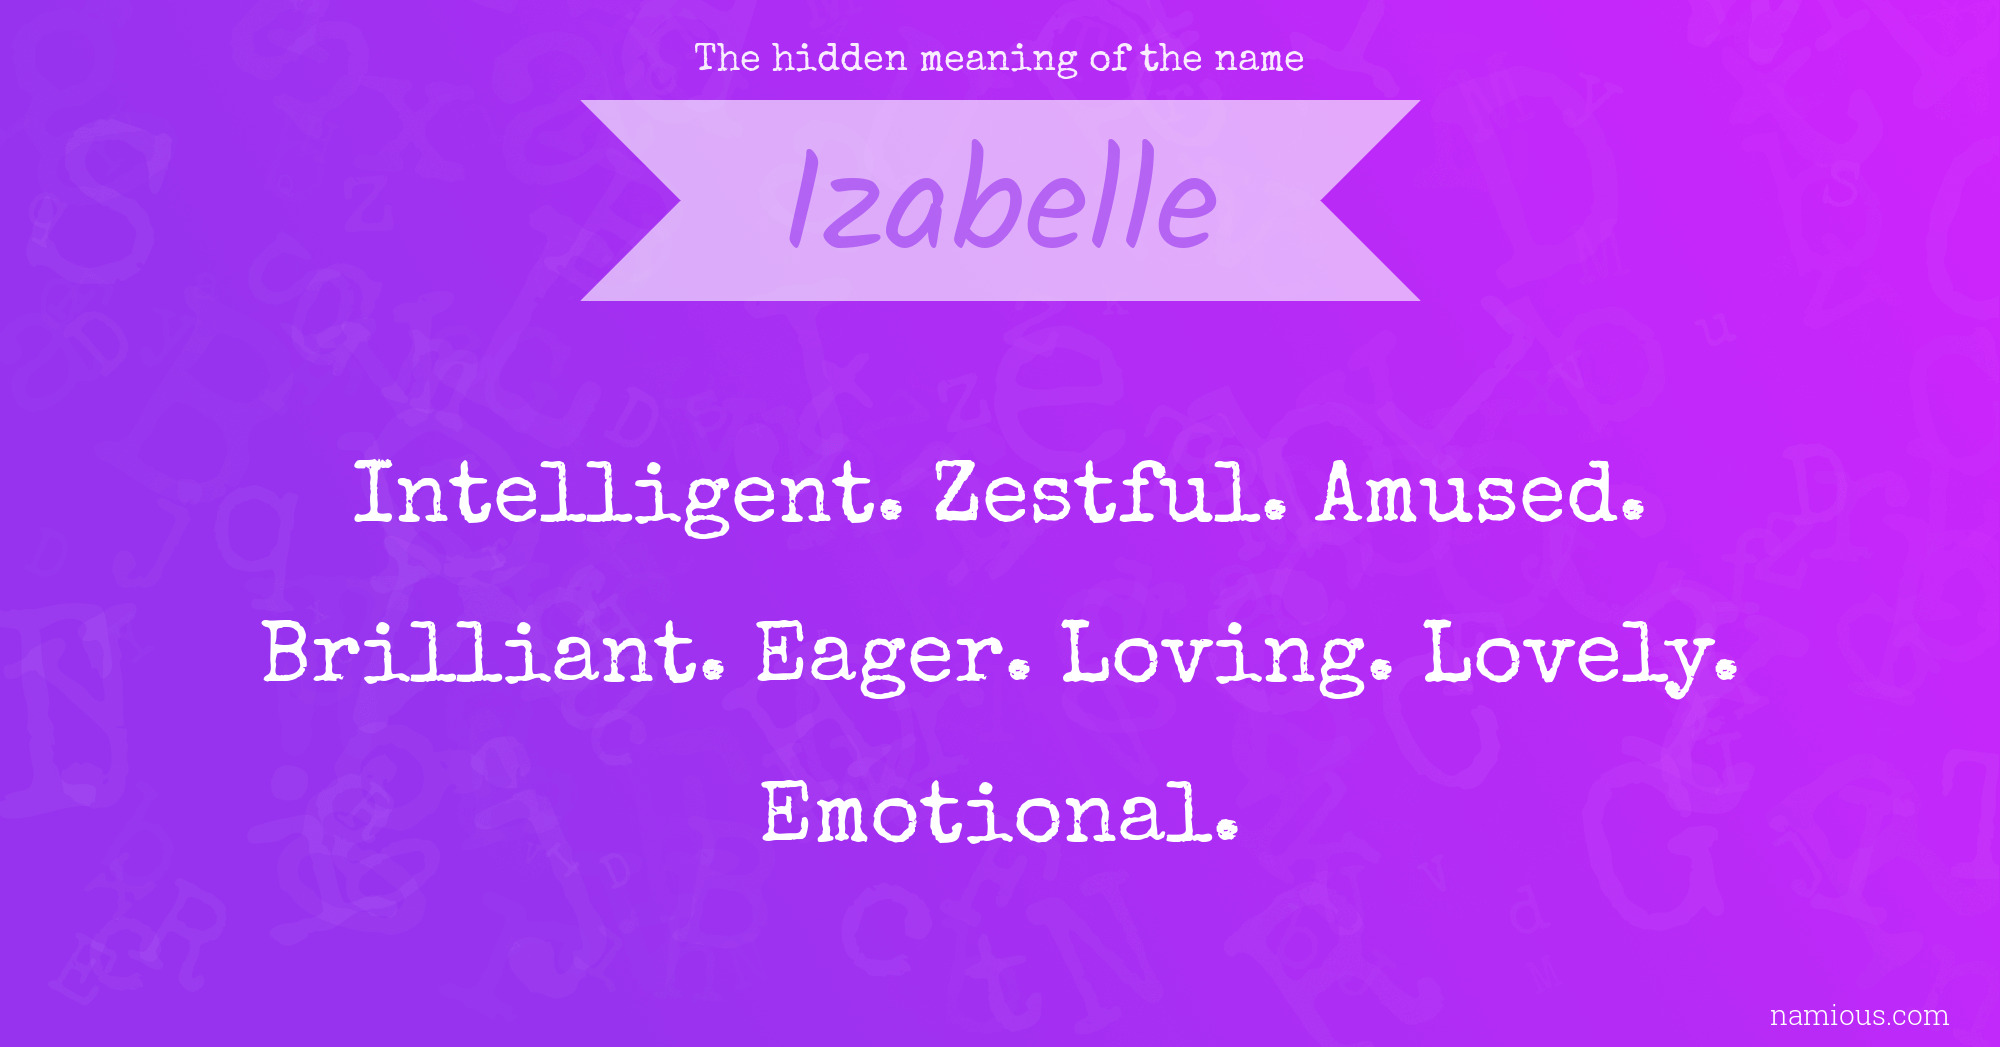 The hidden meaning of the name Izabelle